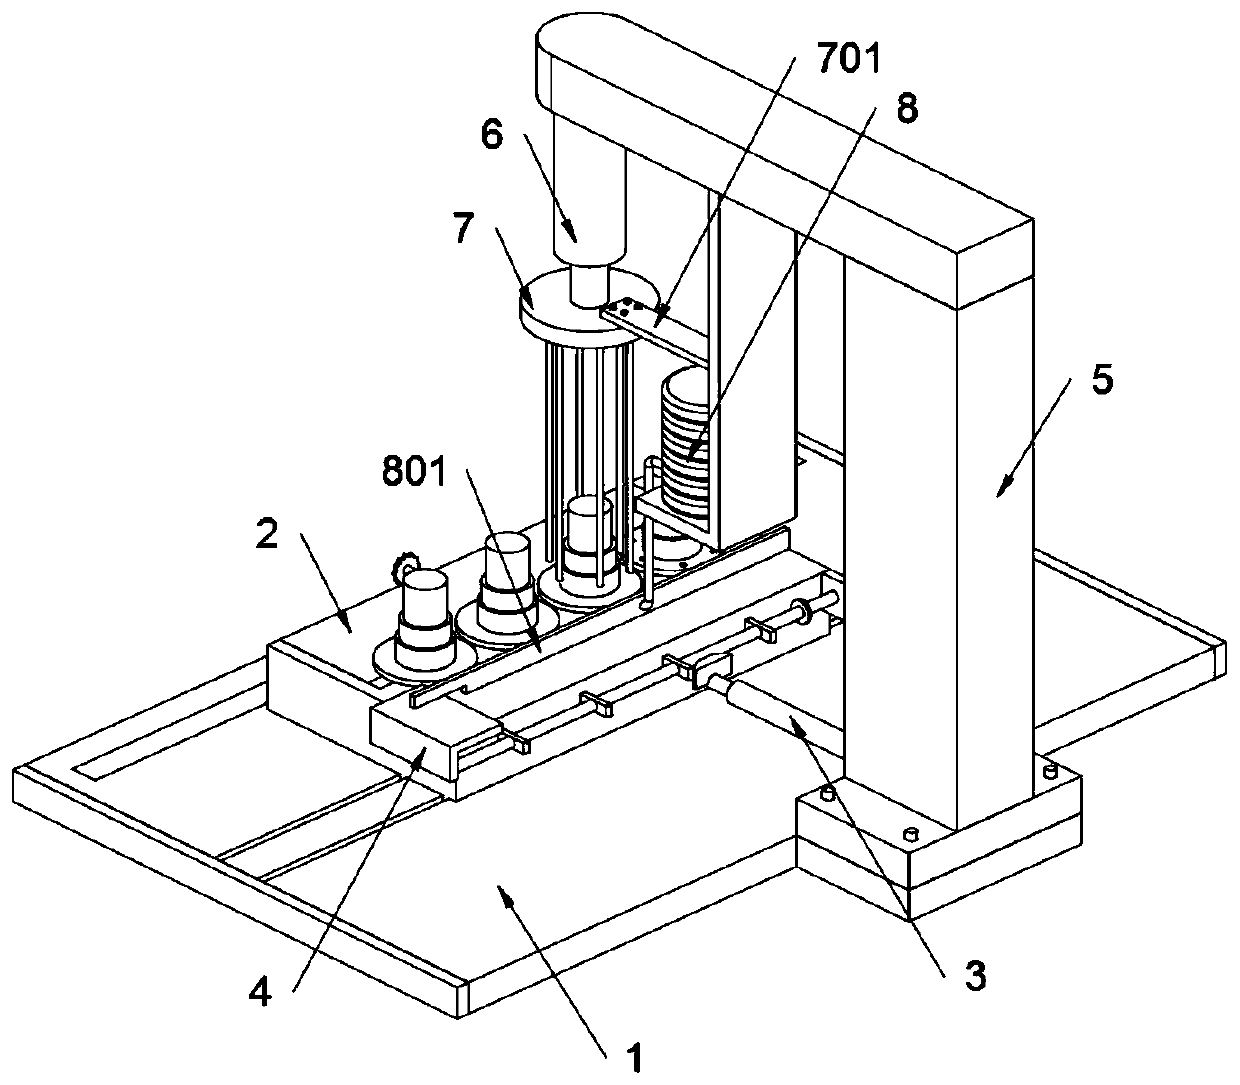 Contraposition type processing device for punching surface of automobile half shaft sleeve